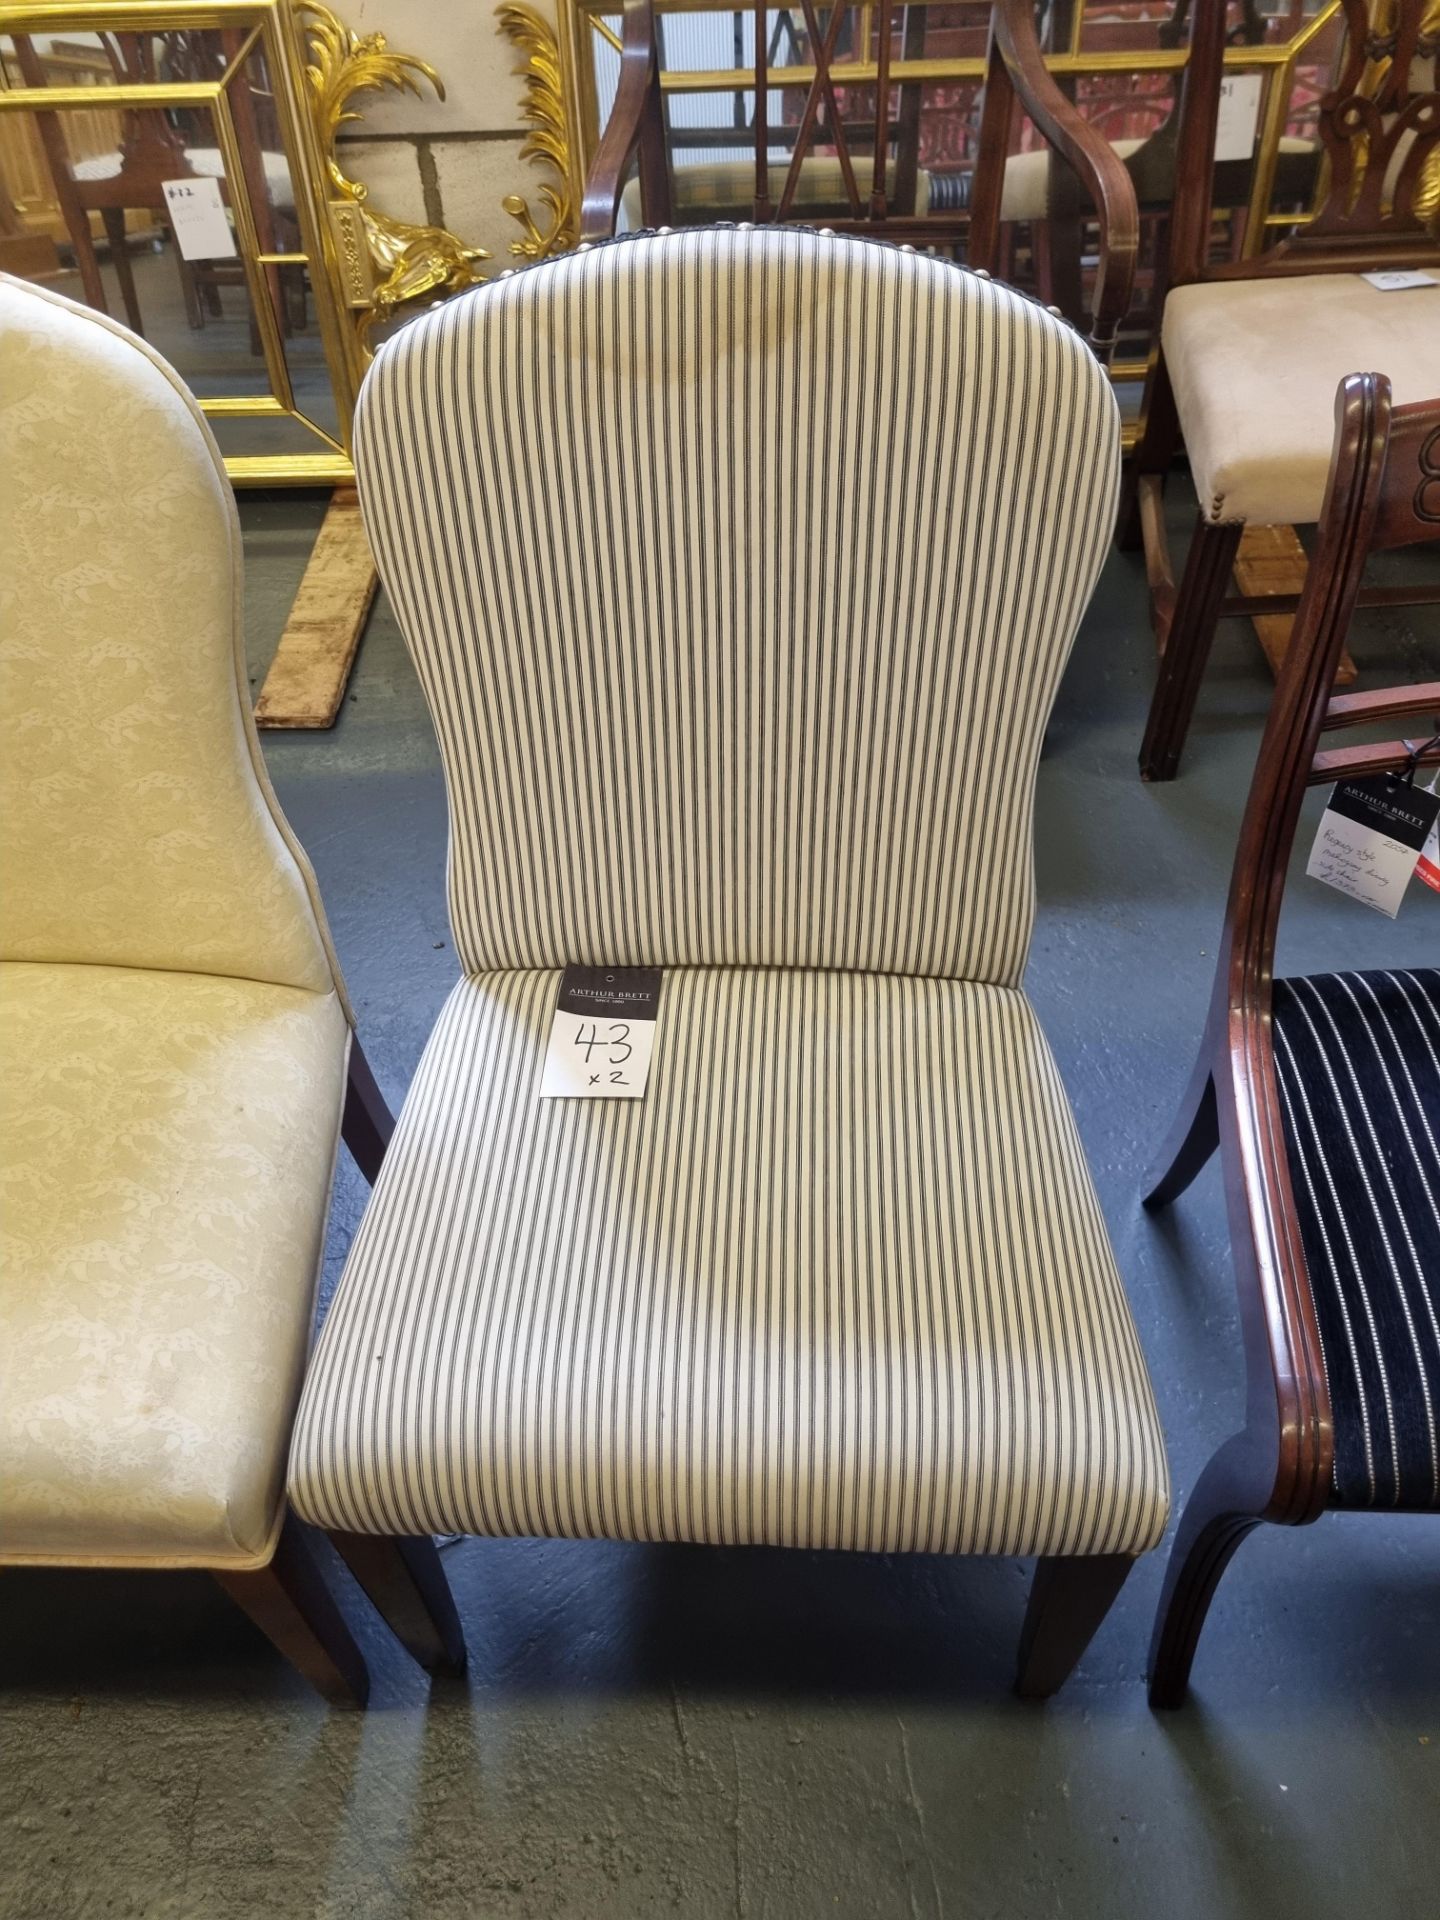 2 X Arthur Brett Handle Back Upholstered Chair With Bespoke Upholstery With Tapered Front Legs And - Bild 2 aus 3